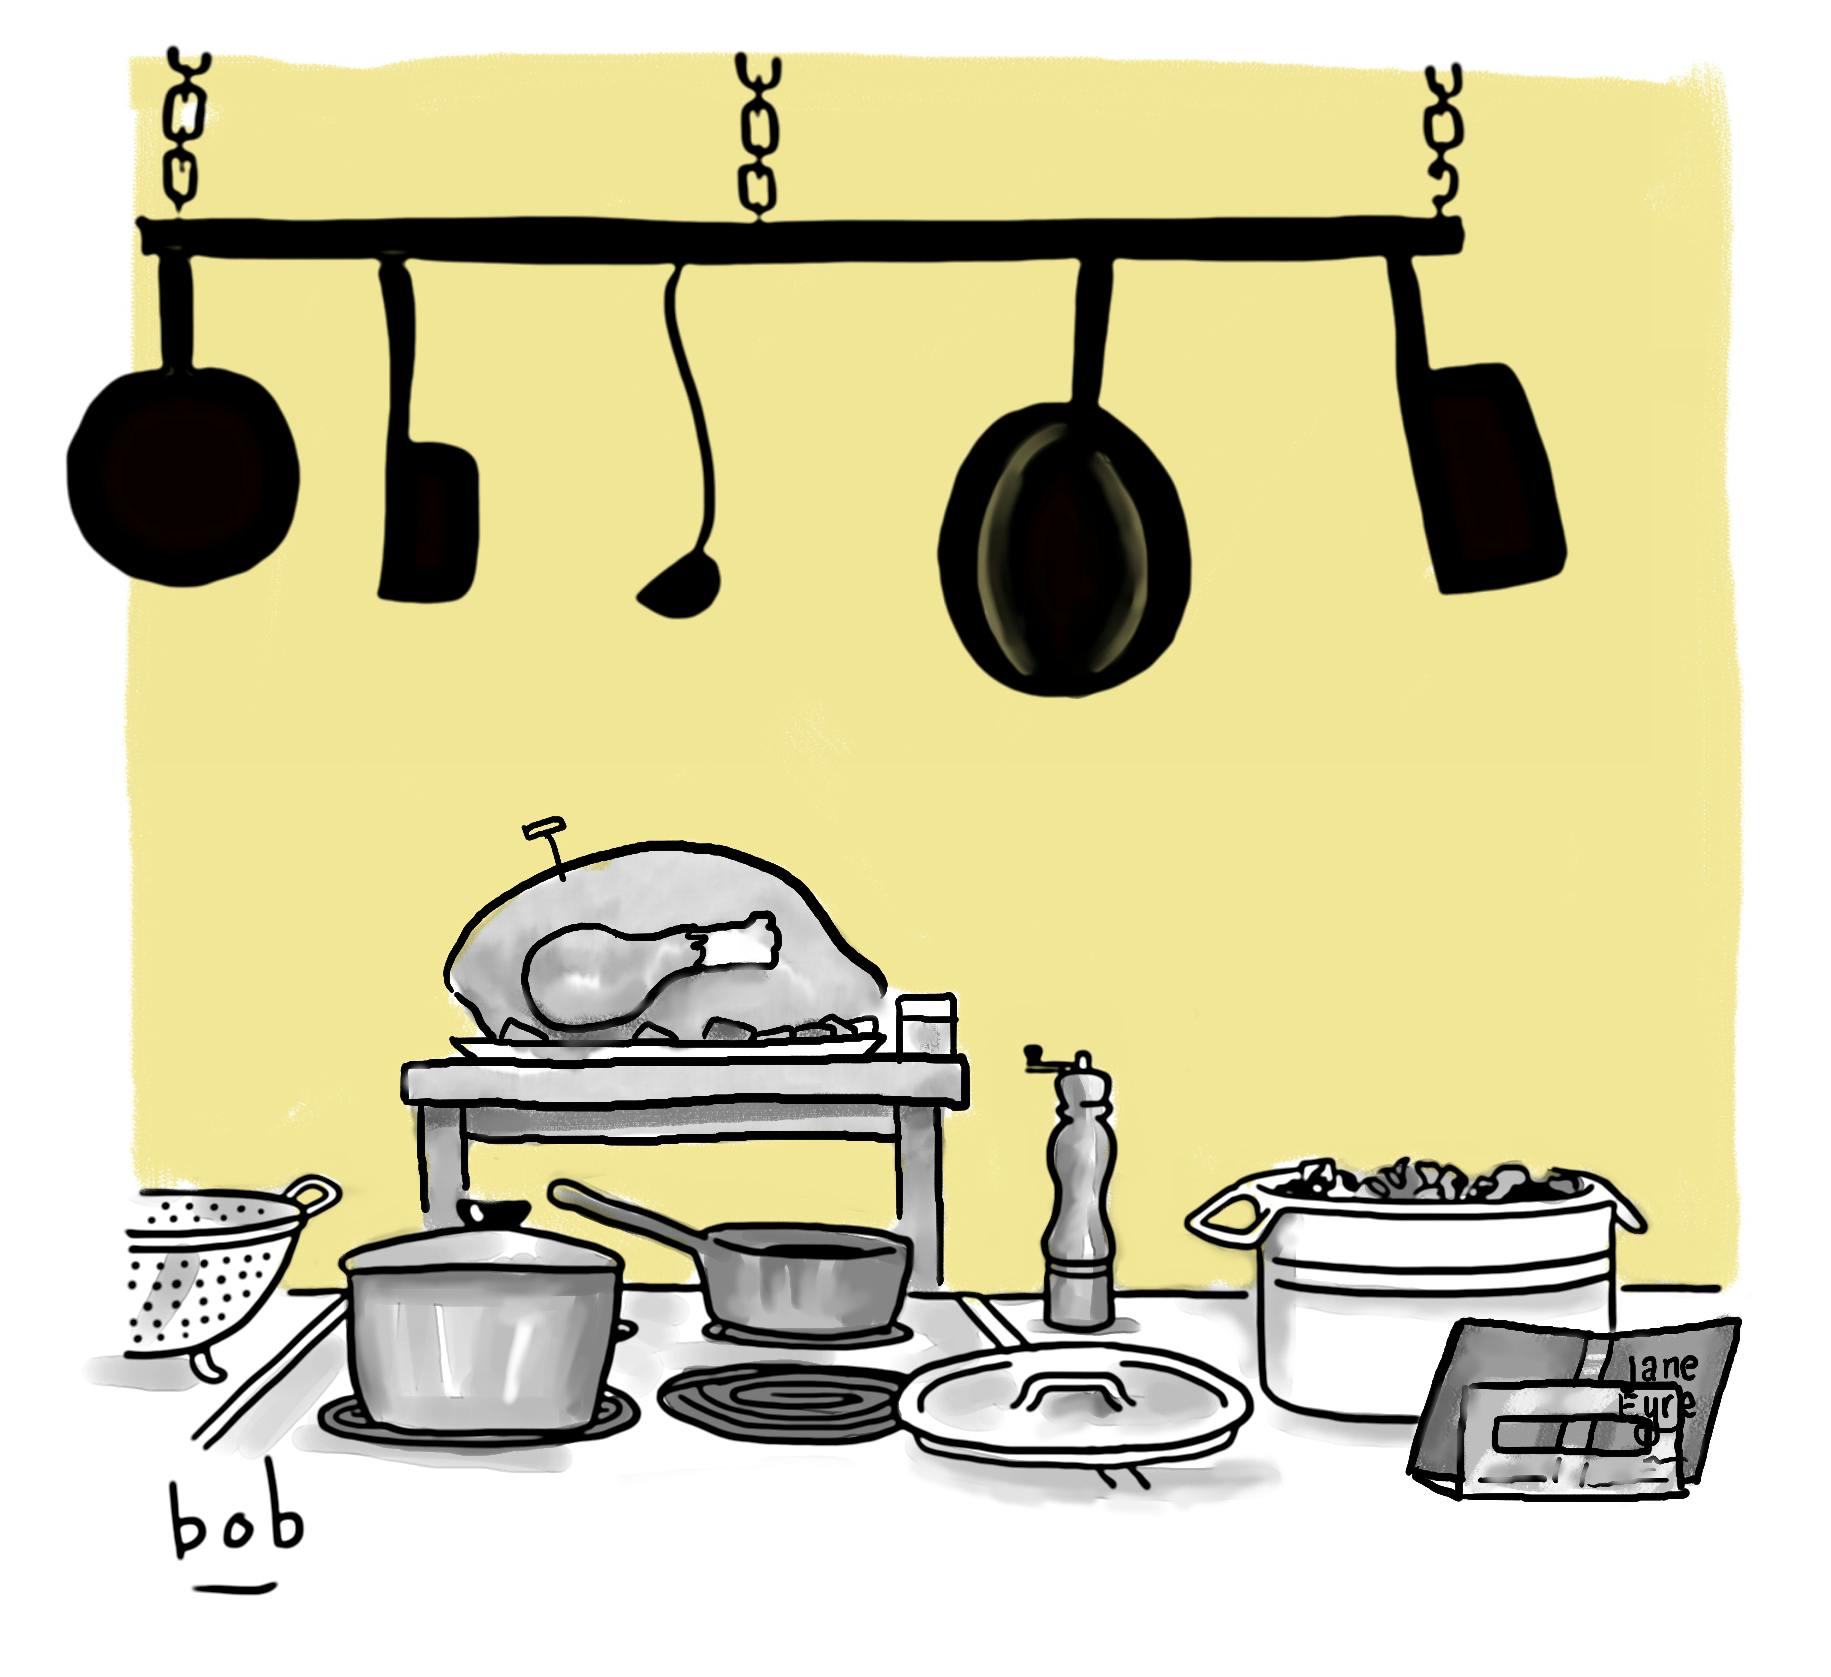 Cartoon by Bob Eckstein. A roasted turkey rests on a platter among an assortment of pots and pans in an elegant kitchen. Instead of a cookbook for reference, an open copy of Jane Eyre rests in a holder.